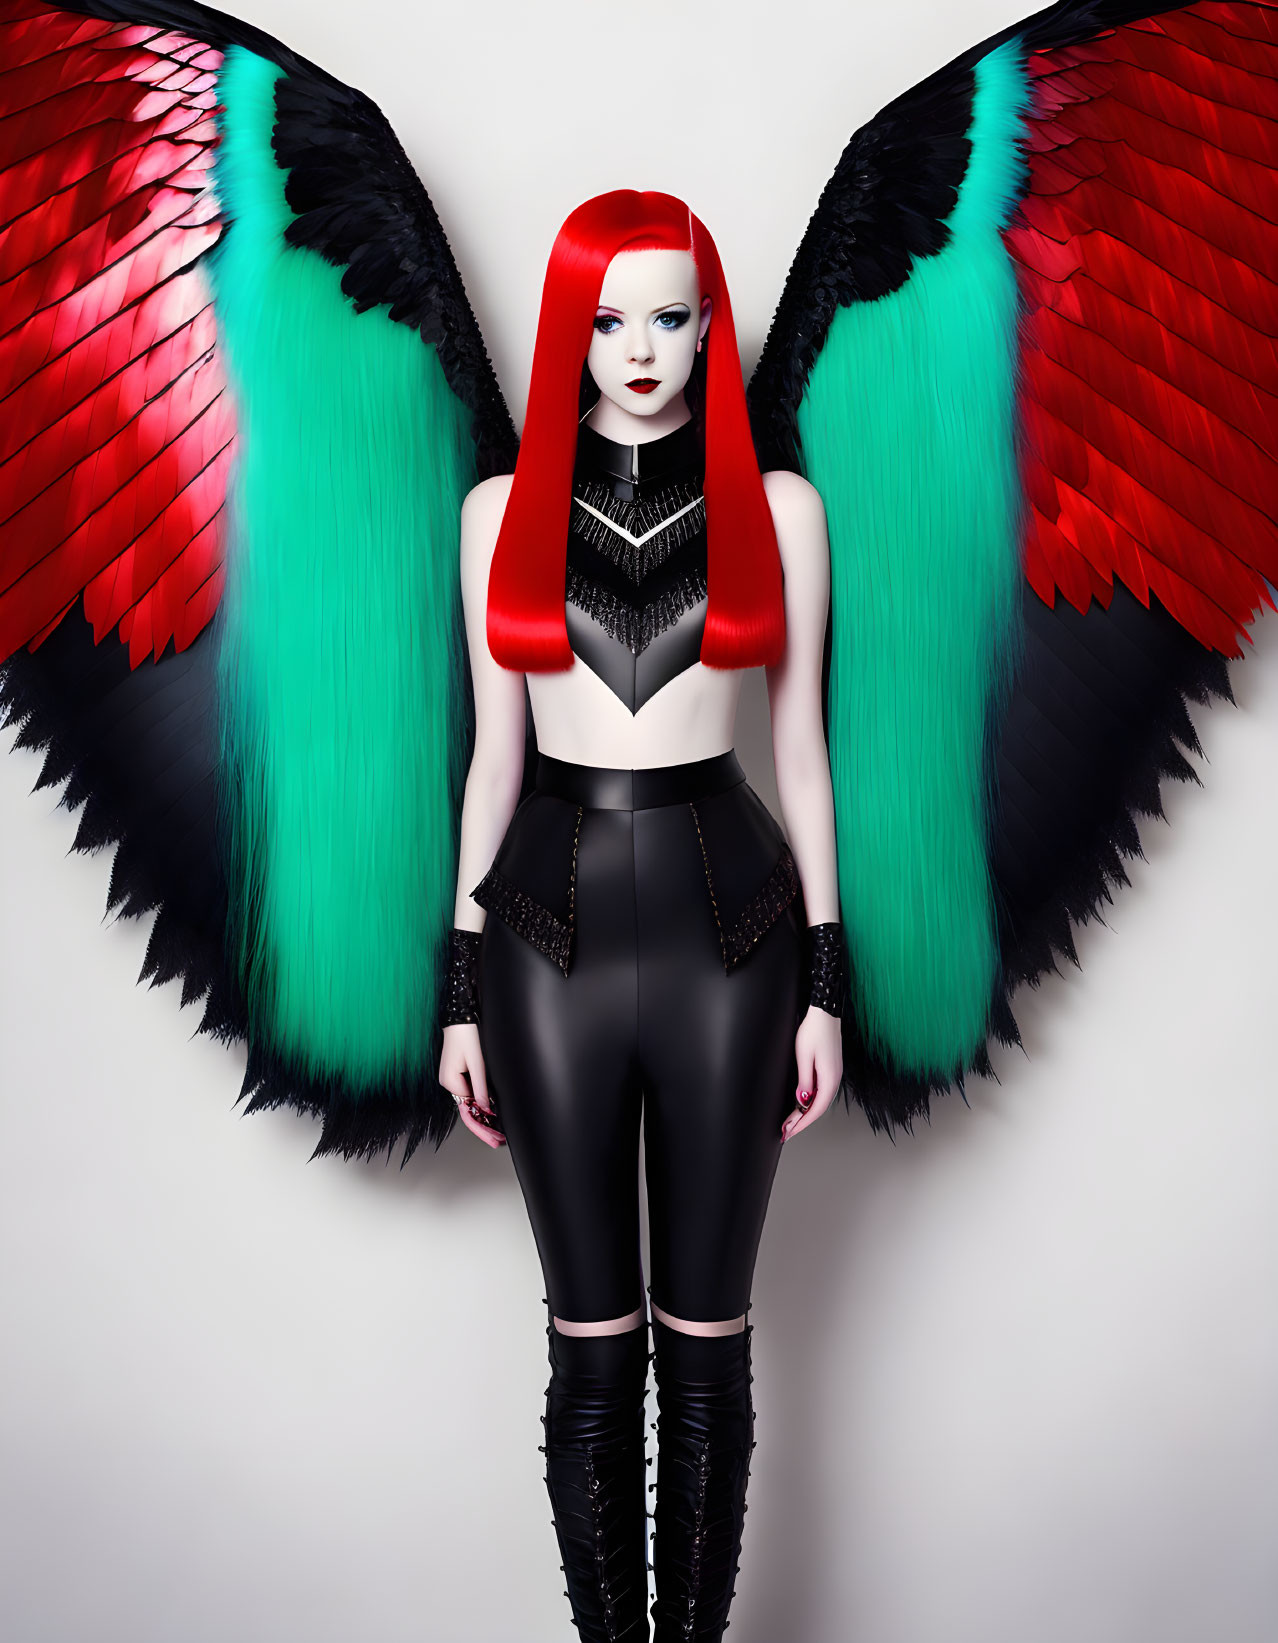 Vibrant woman with red hair and colorful wings in black outfit